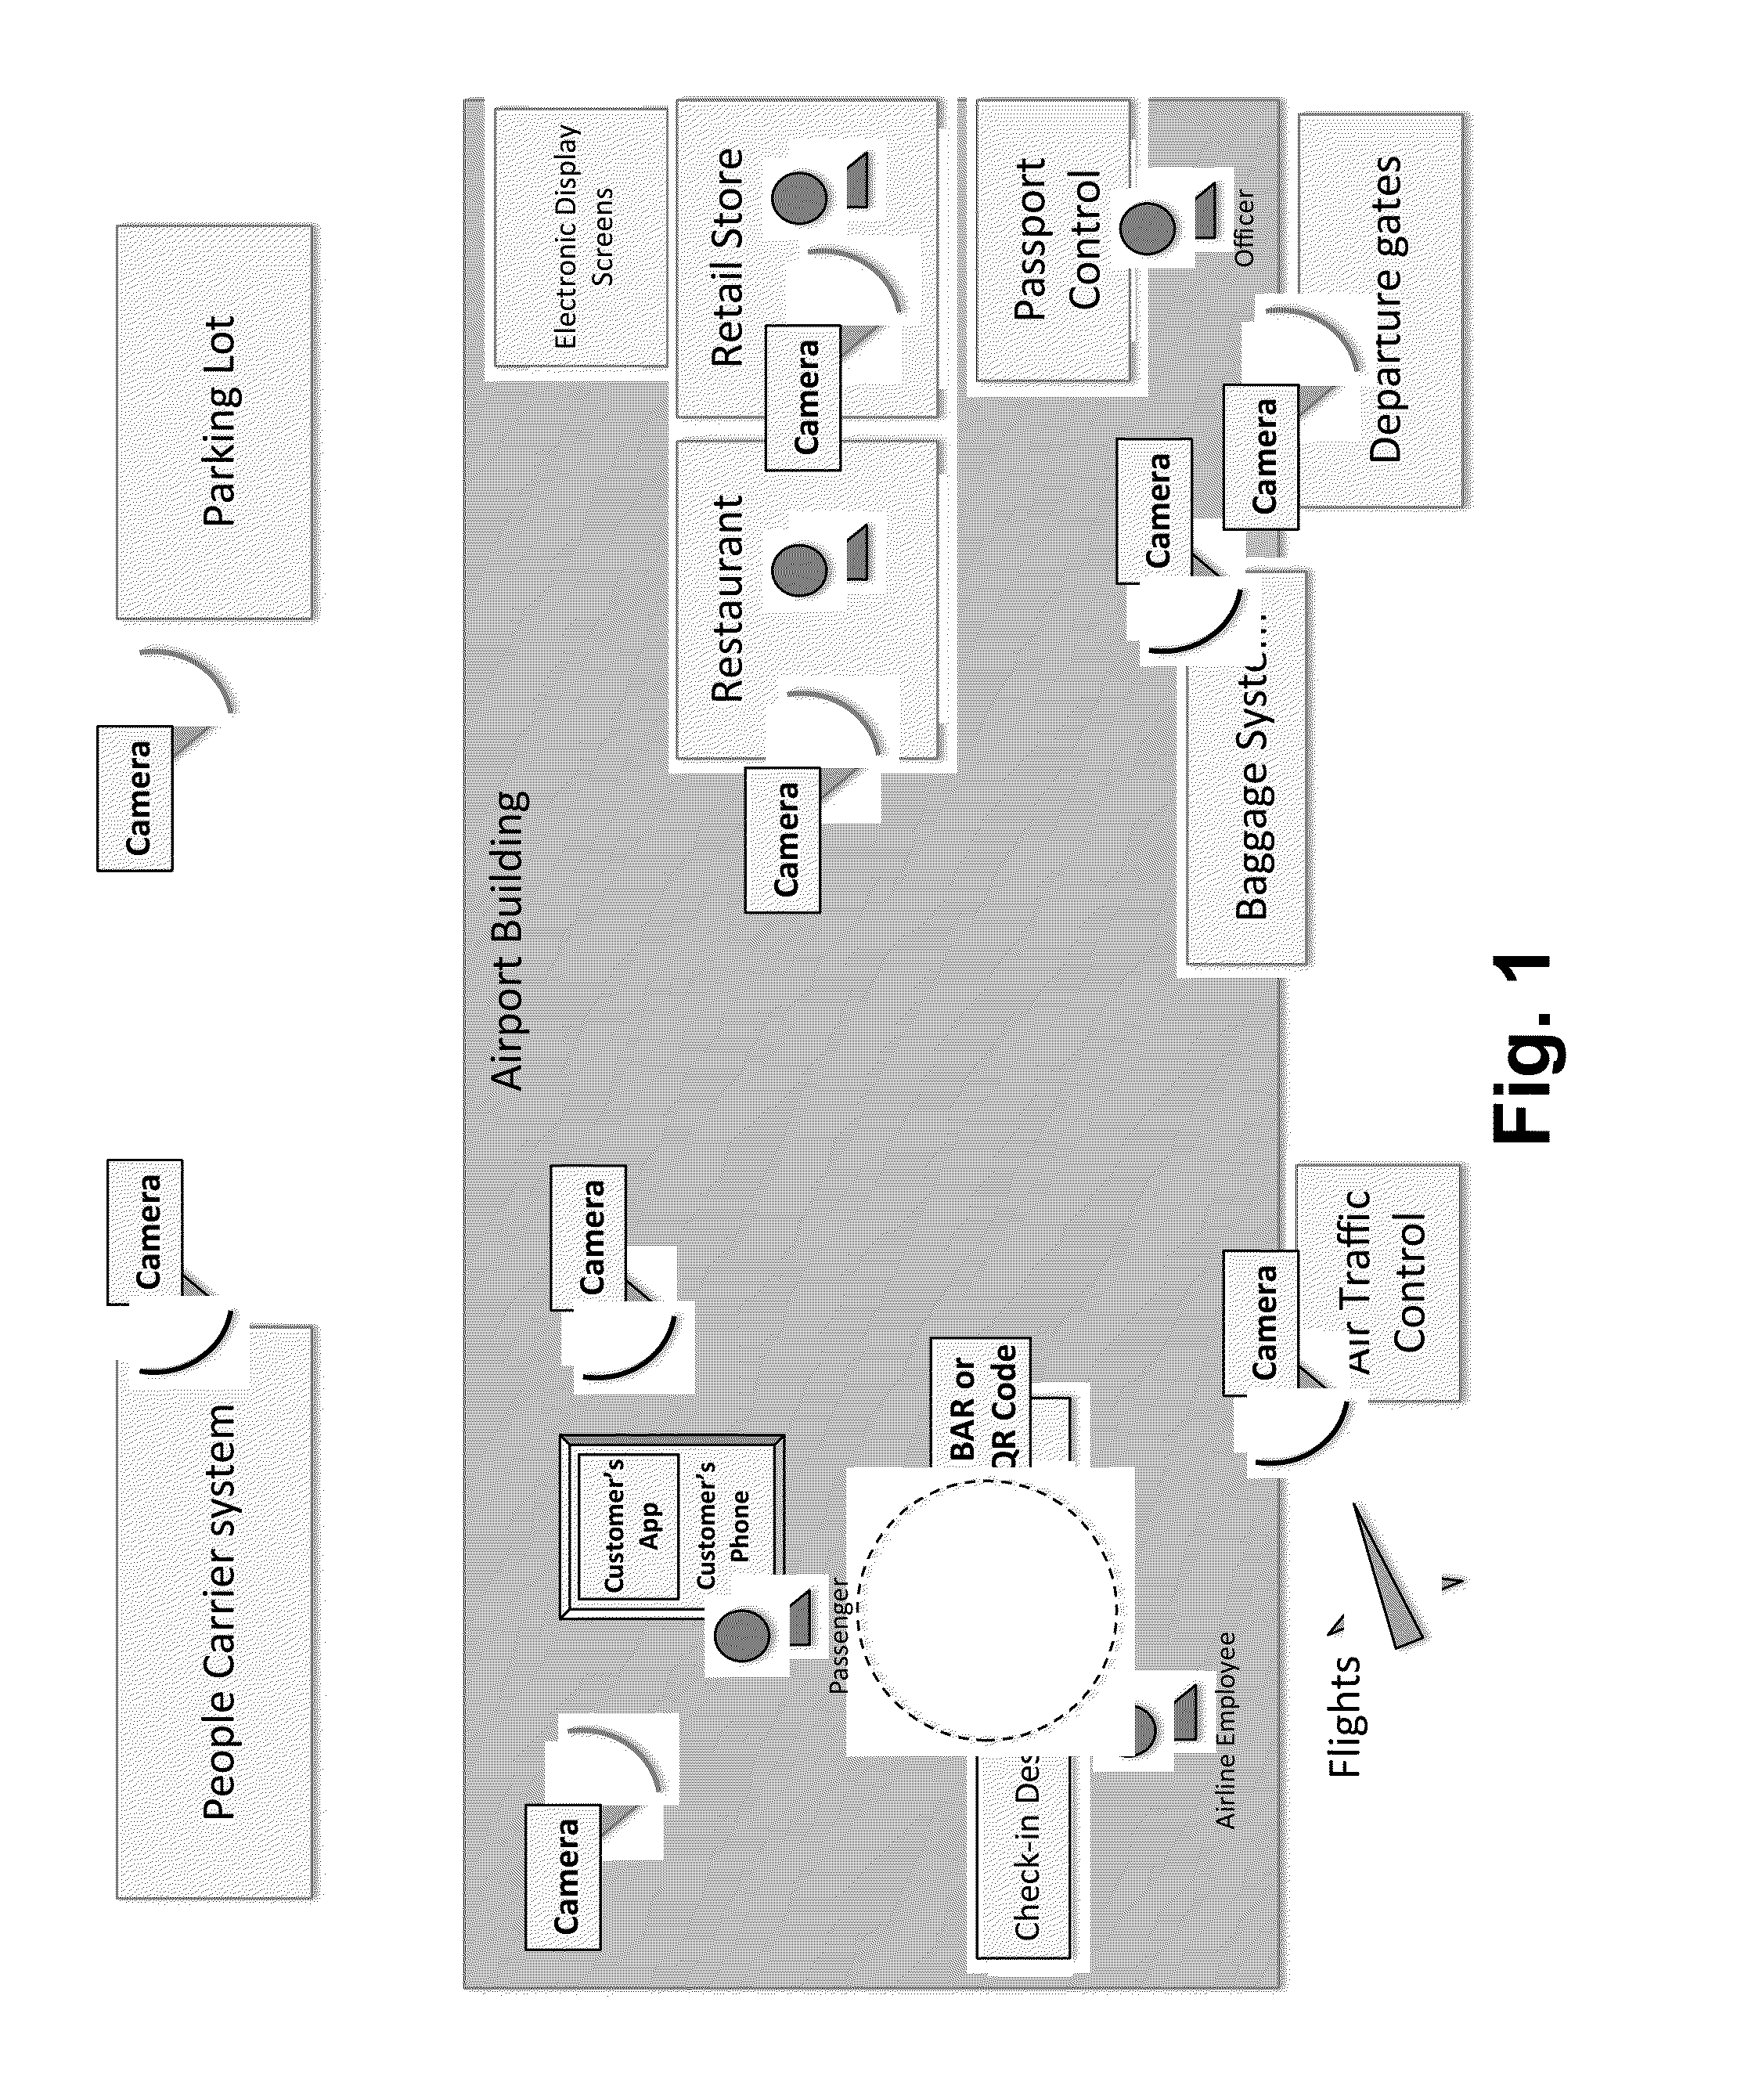 Large venue surveillance and reaction systems and methods using dynamically analyzed emotional input